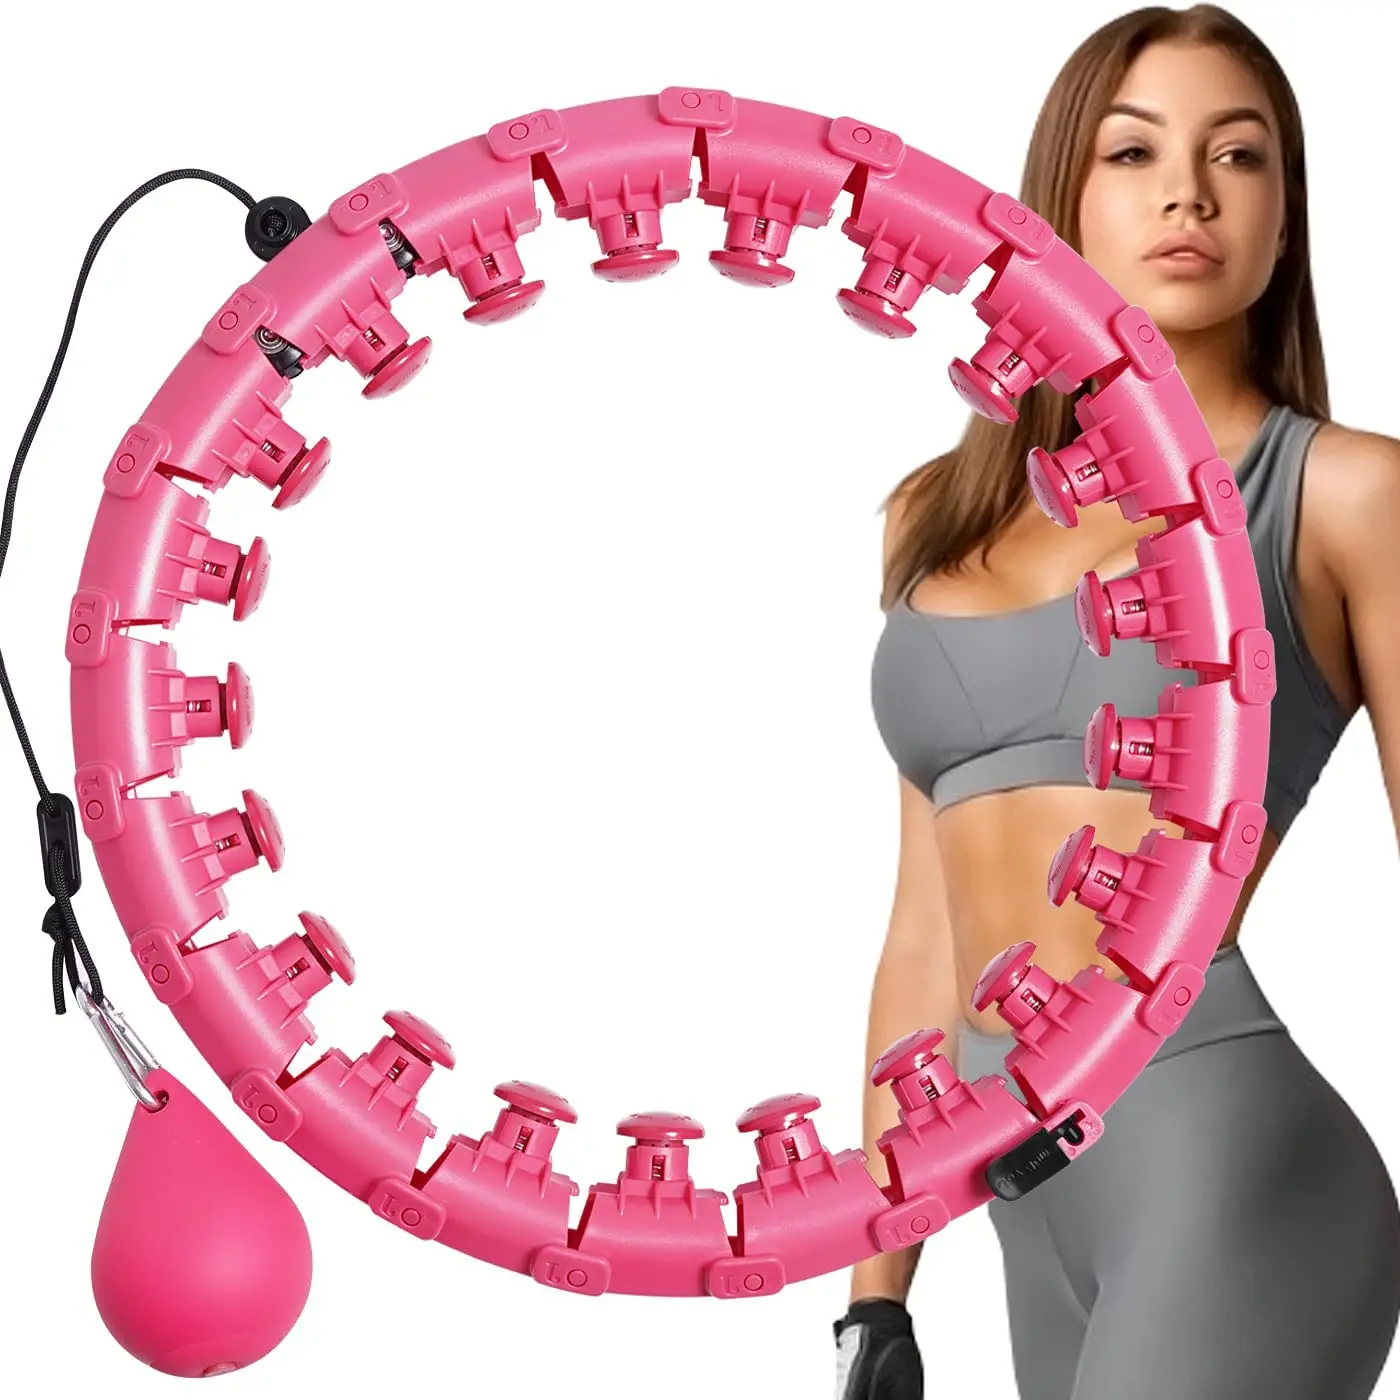 

Smart Weighted Hoola Hoop Adjustable Detachable Massage Glow Hoola Hoops Manufactures Home Exercise Magnetic Hula Ring For Women, Pink,blue,purple